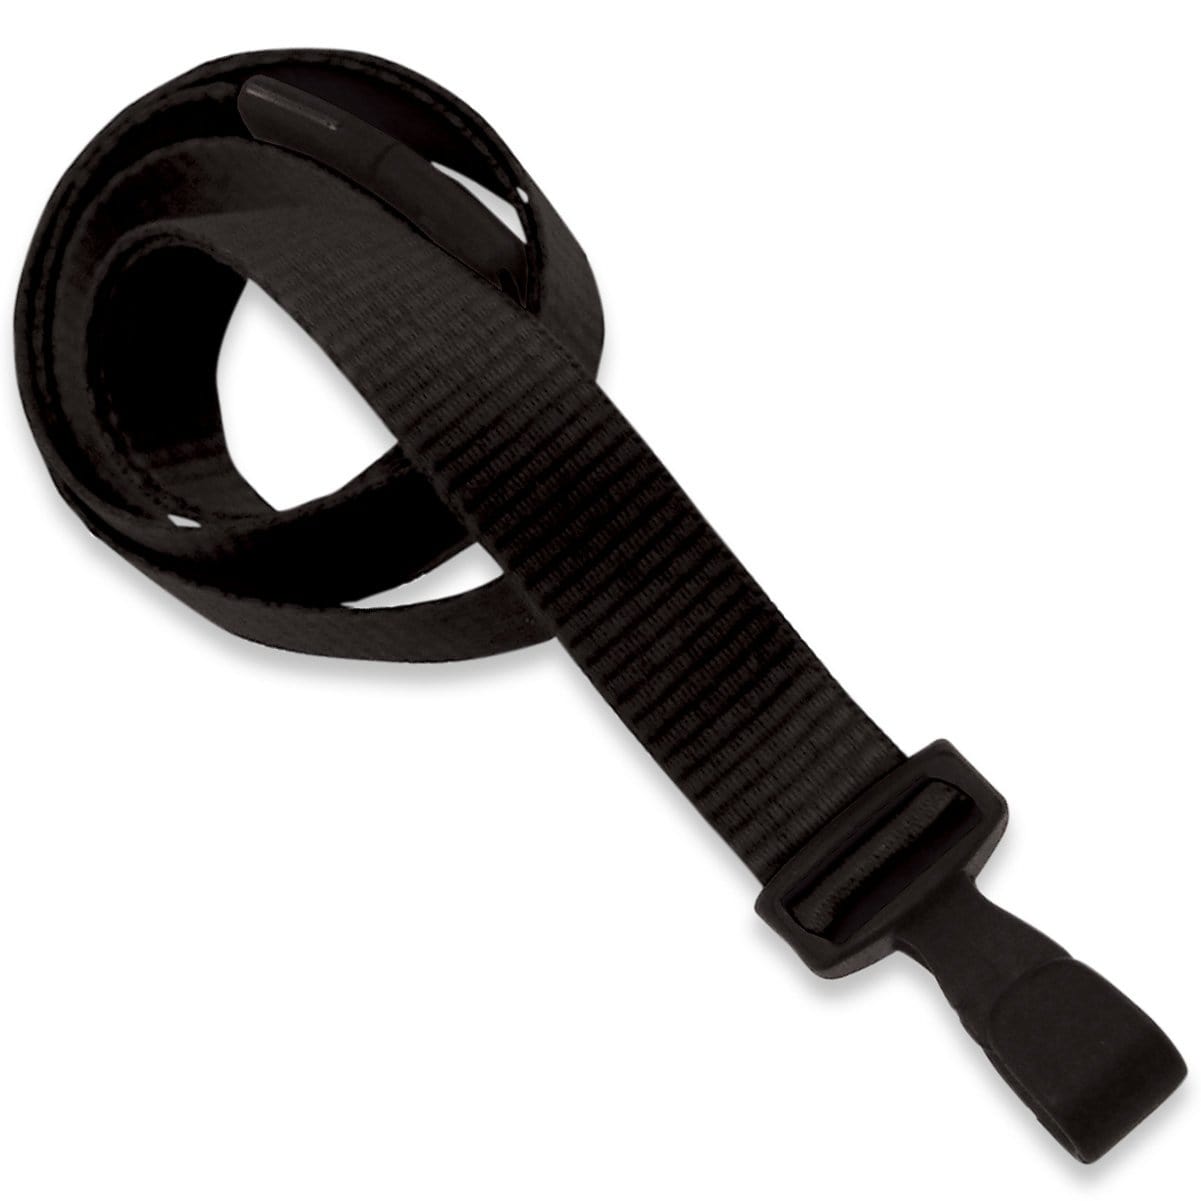 Antimicrobial Lanyard with Breakaway Clasp and No Twist Plastic